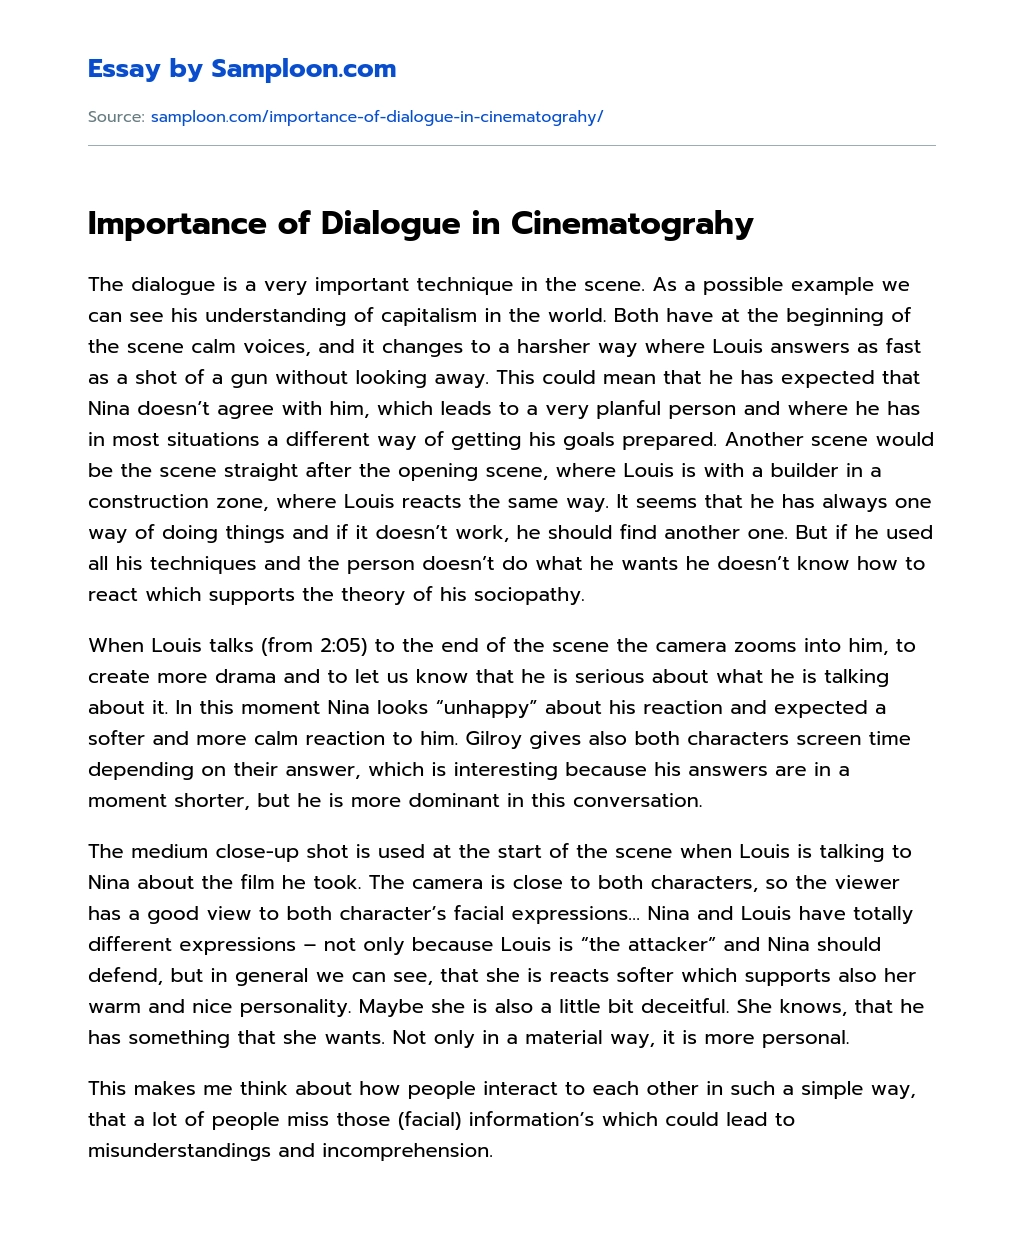 Importance of Dialogue in Cinematograhy essay